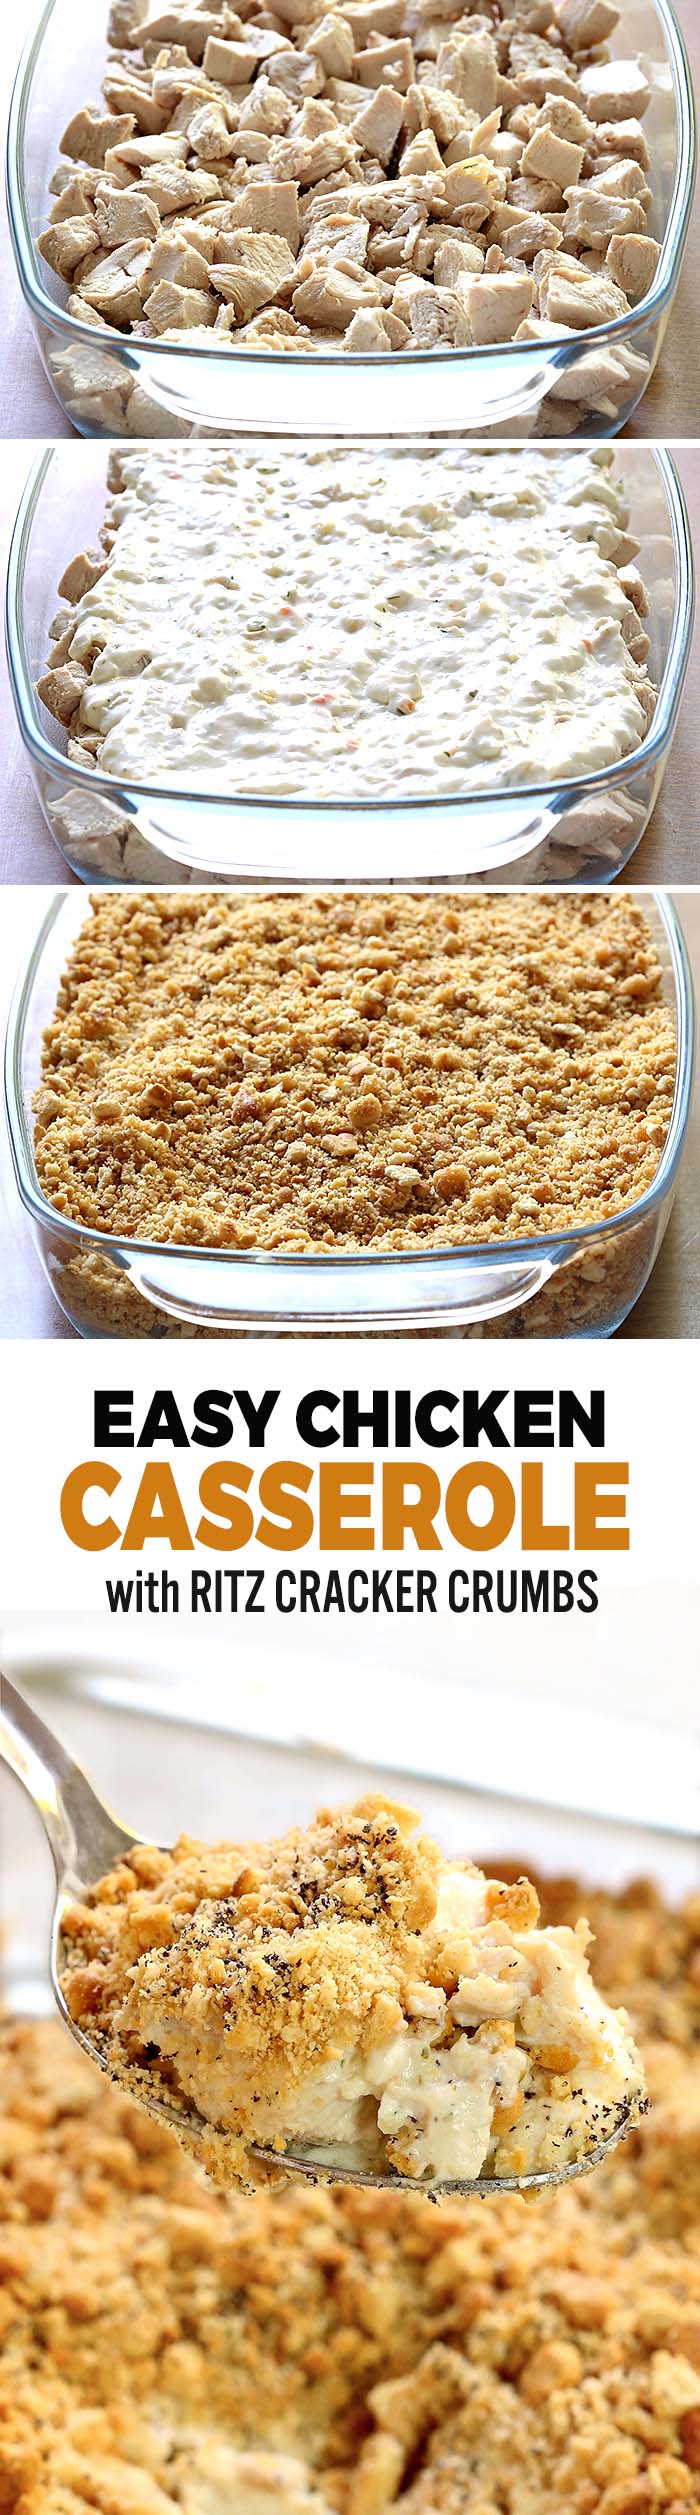 Easy Chicken Casserole – A creamy and easy dinner that your whole family will love. All you need are 6 simple pantry ingredients a few minutes and you are ready to go.